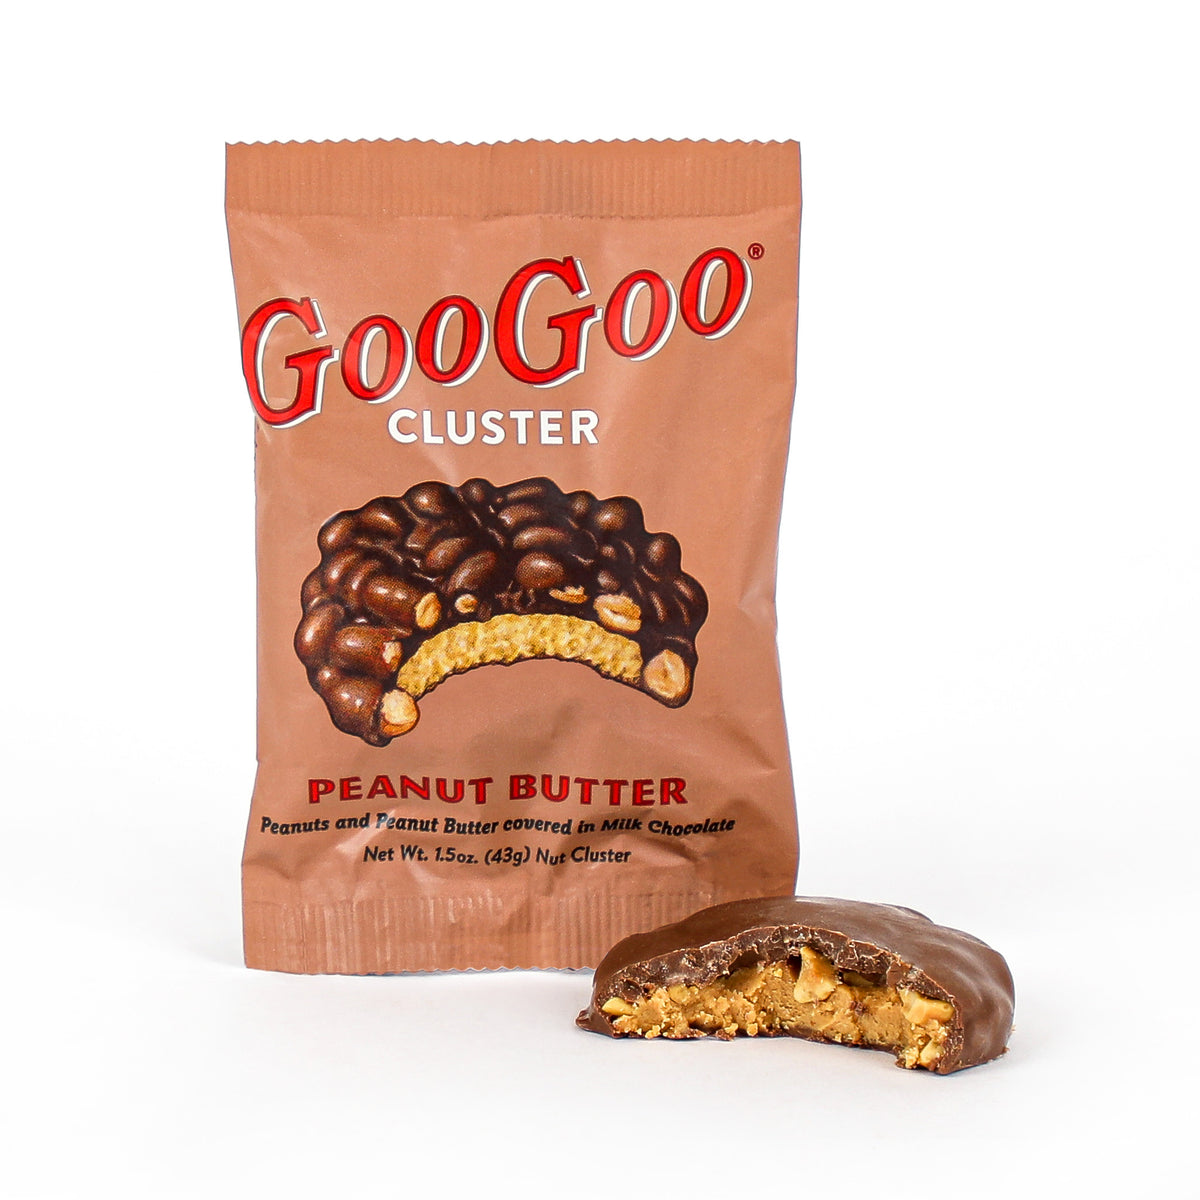 ABOUT - Goo Goo Cluster